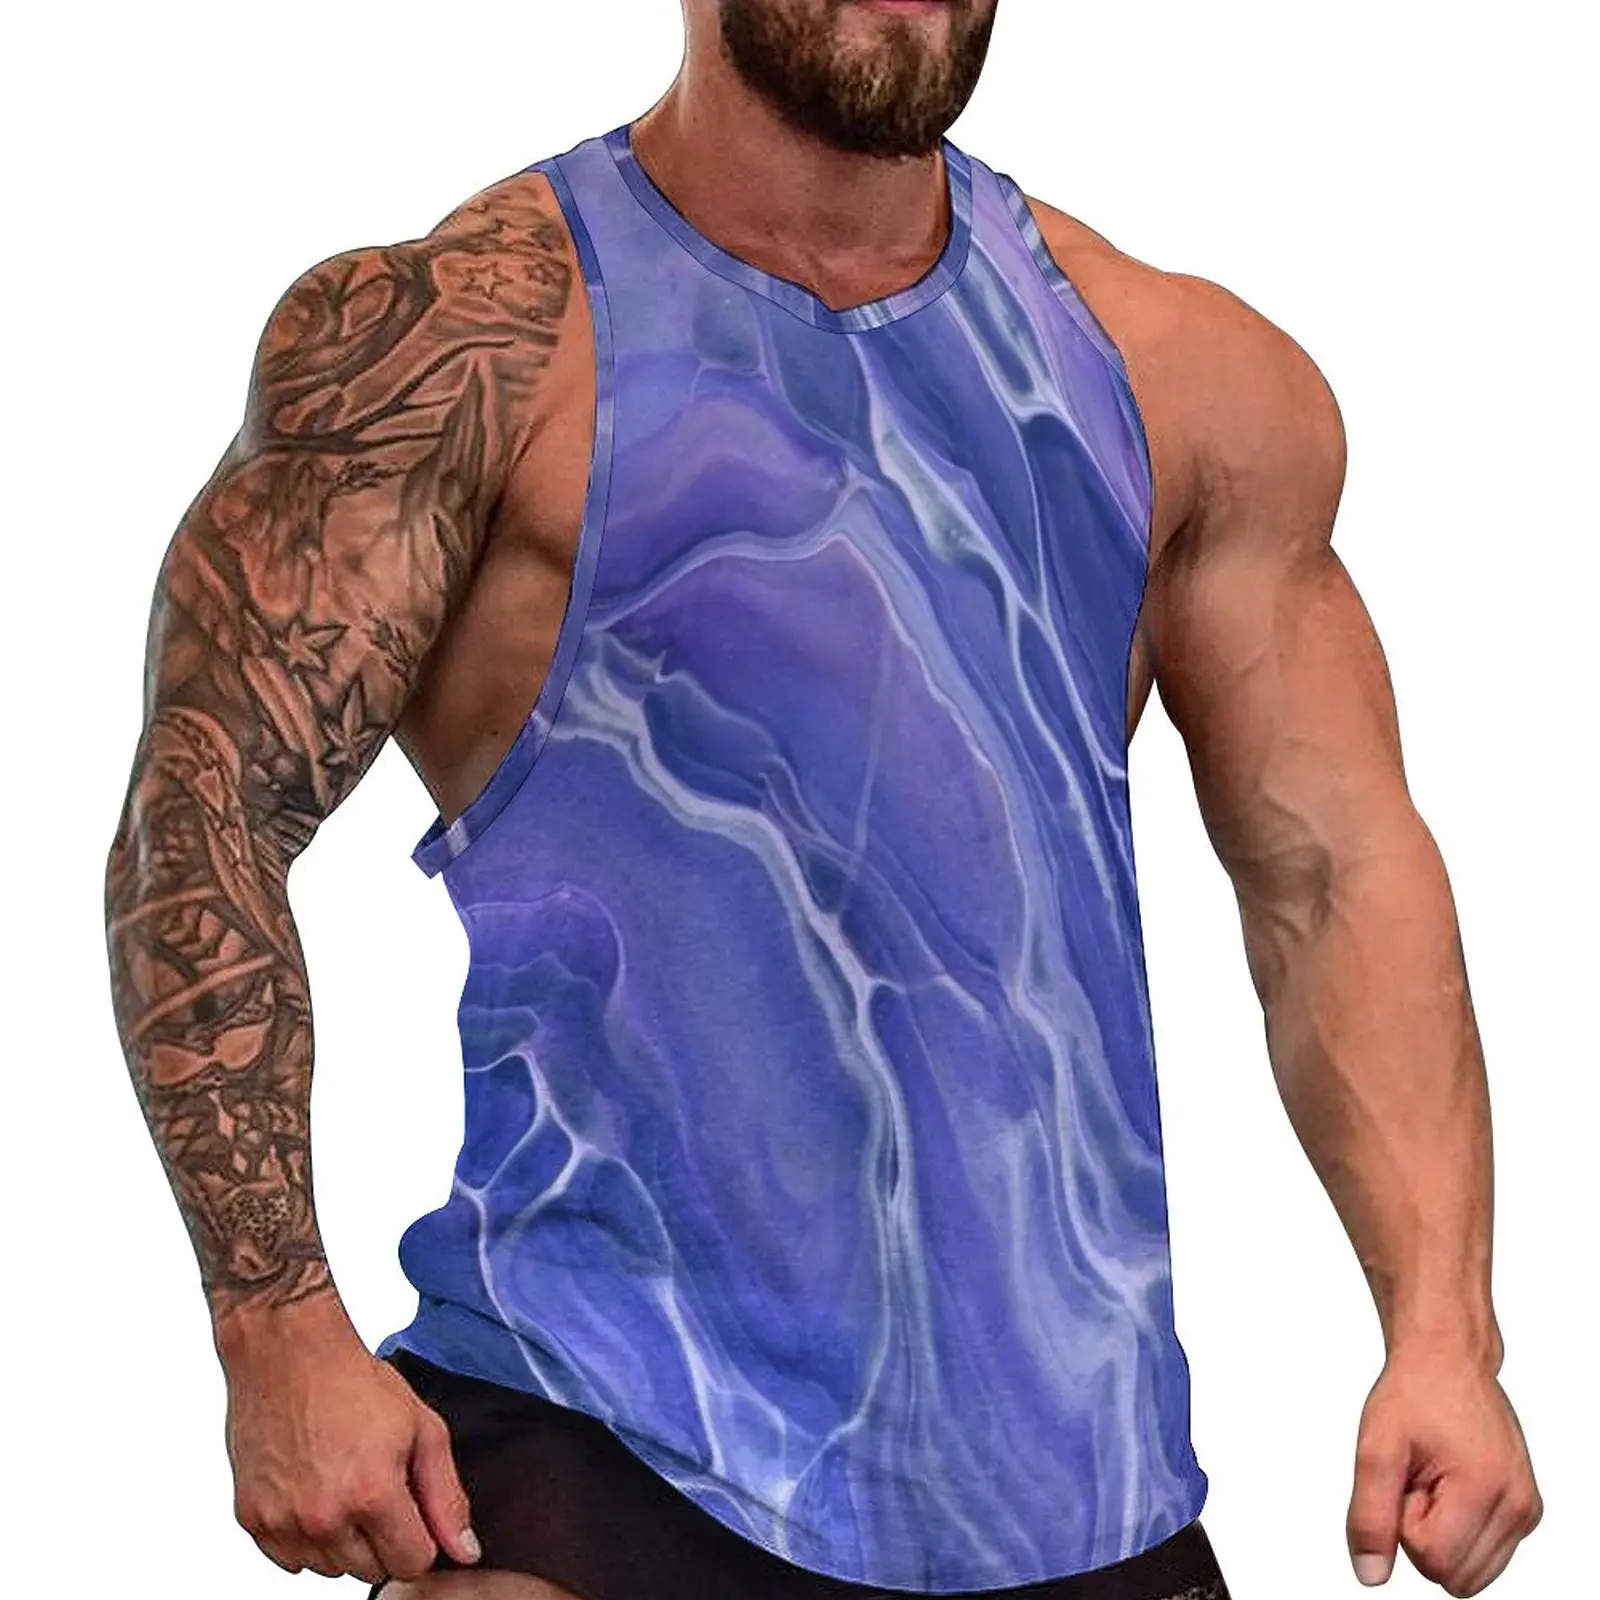 

Lavender Blue Marble Beach Tank Top Fantasy Violet Abstraction Gym Tops Male Design Fashion Sleeveless Shirts Big Size 4XL 5XL